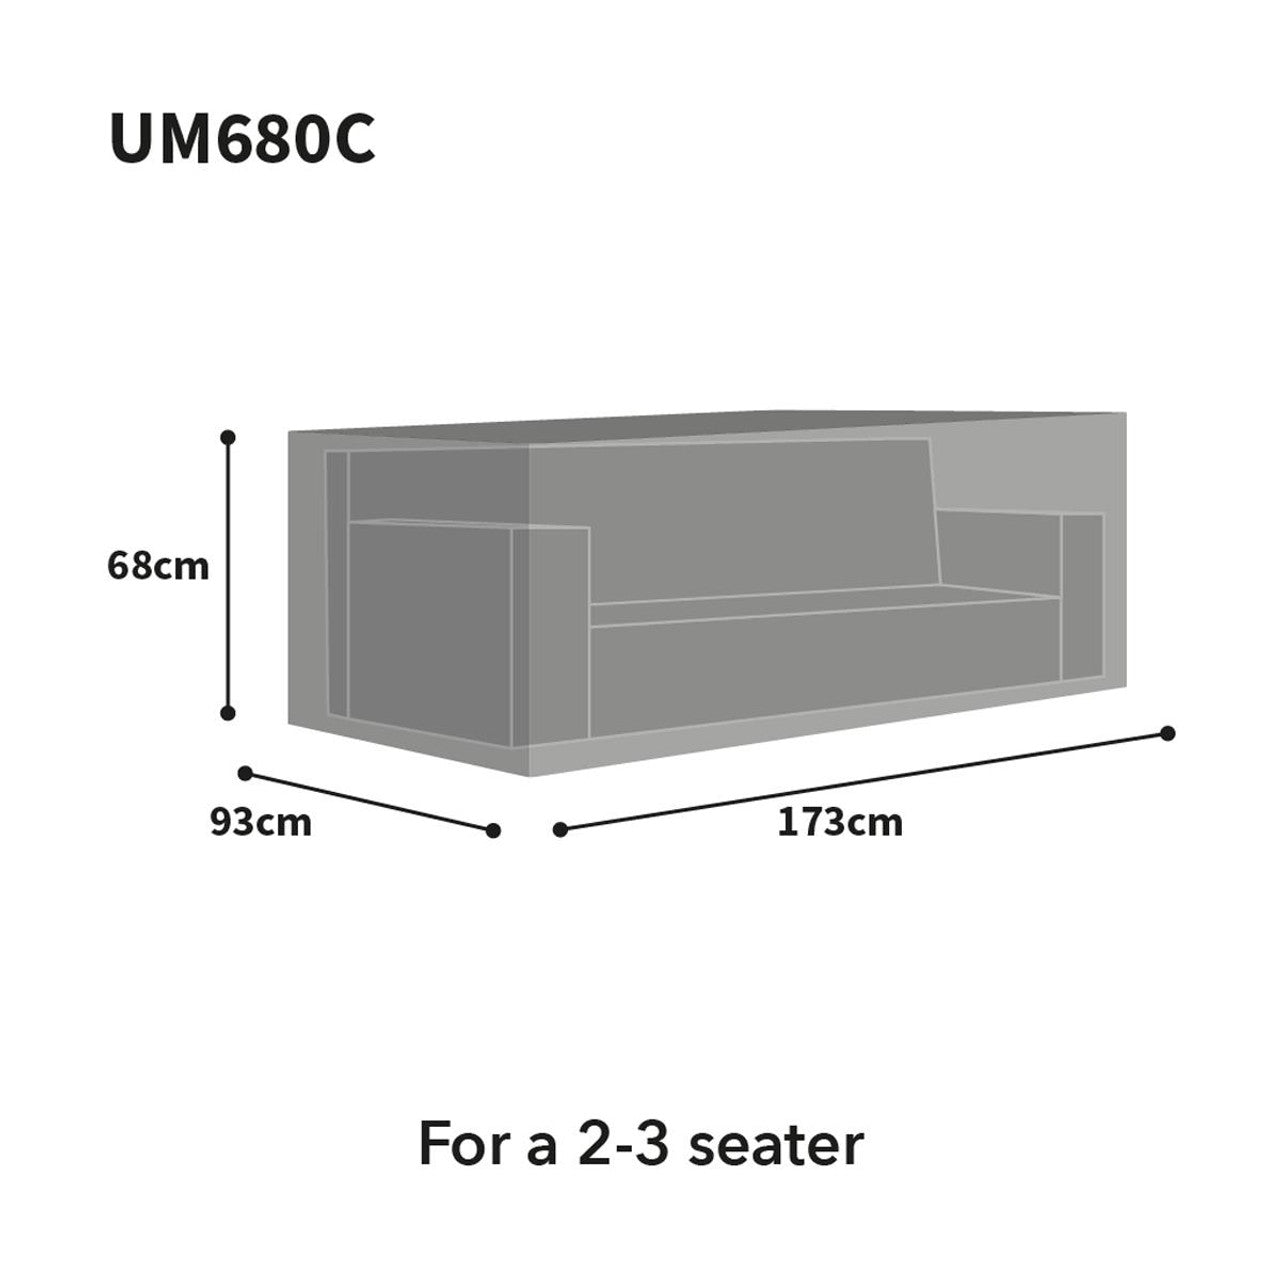 Bosmere Ultimate Protector Outdoor Furniture Cover for Medium Sofa 173cm x 93cm